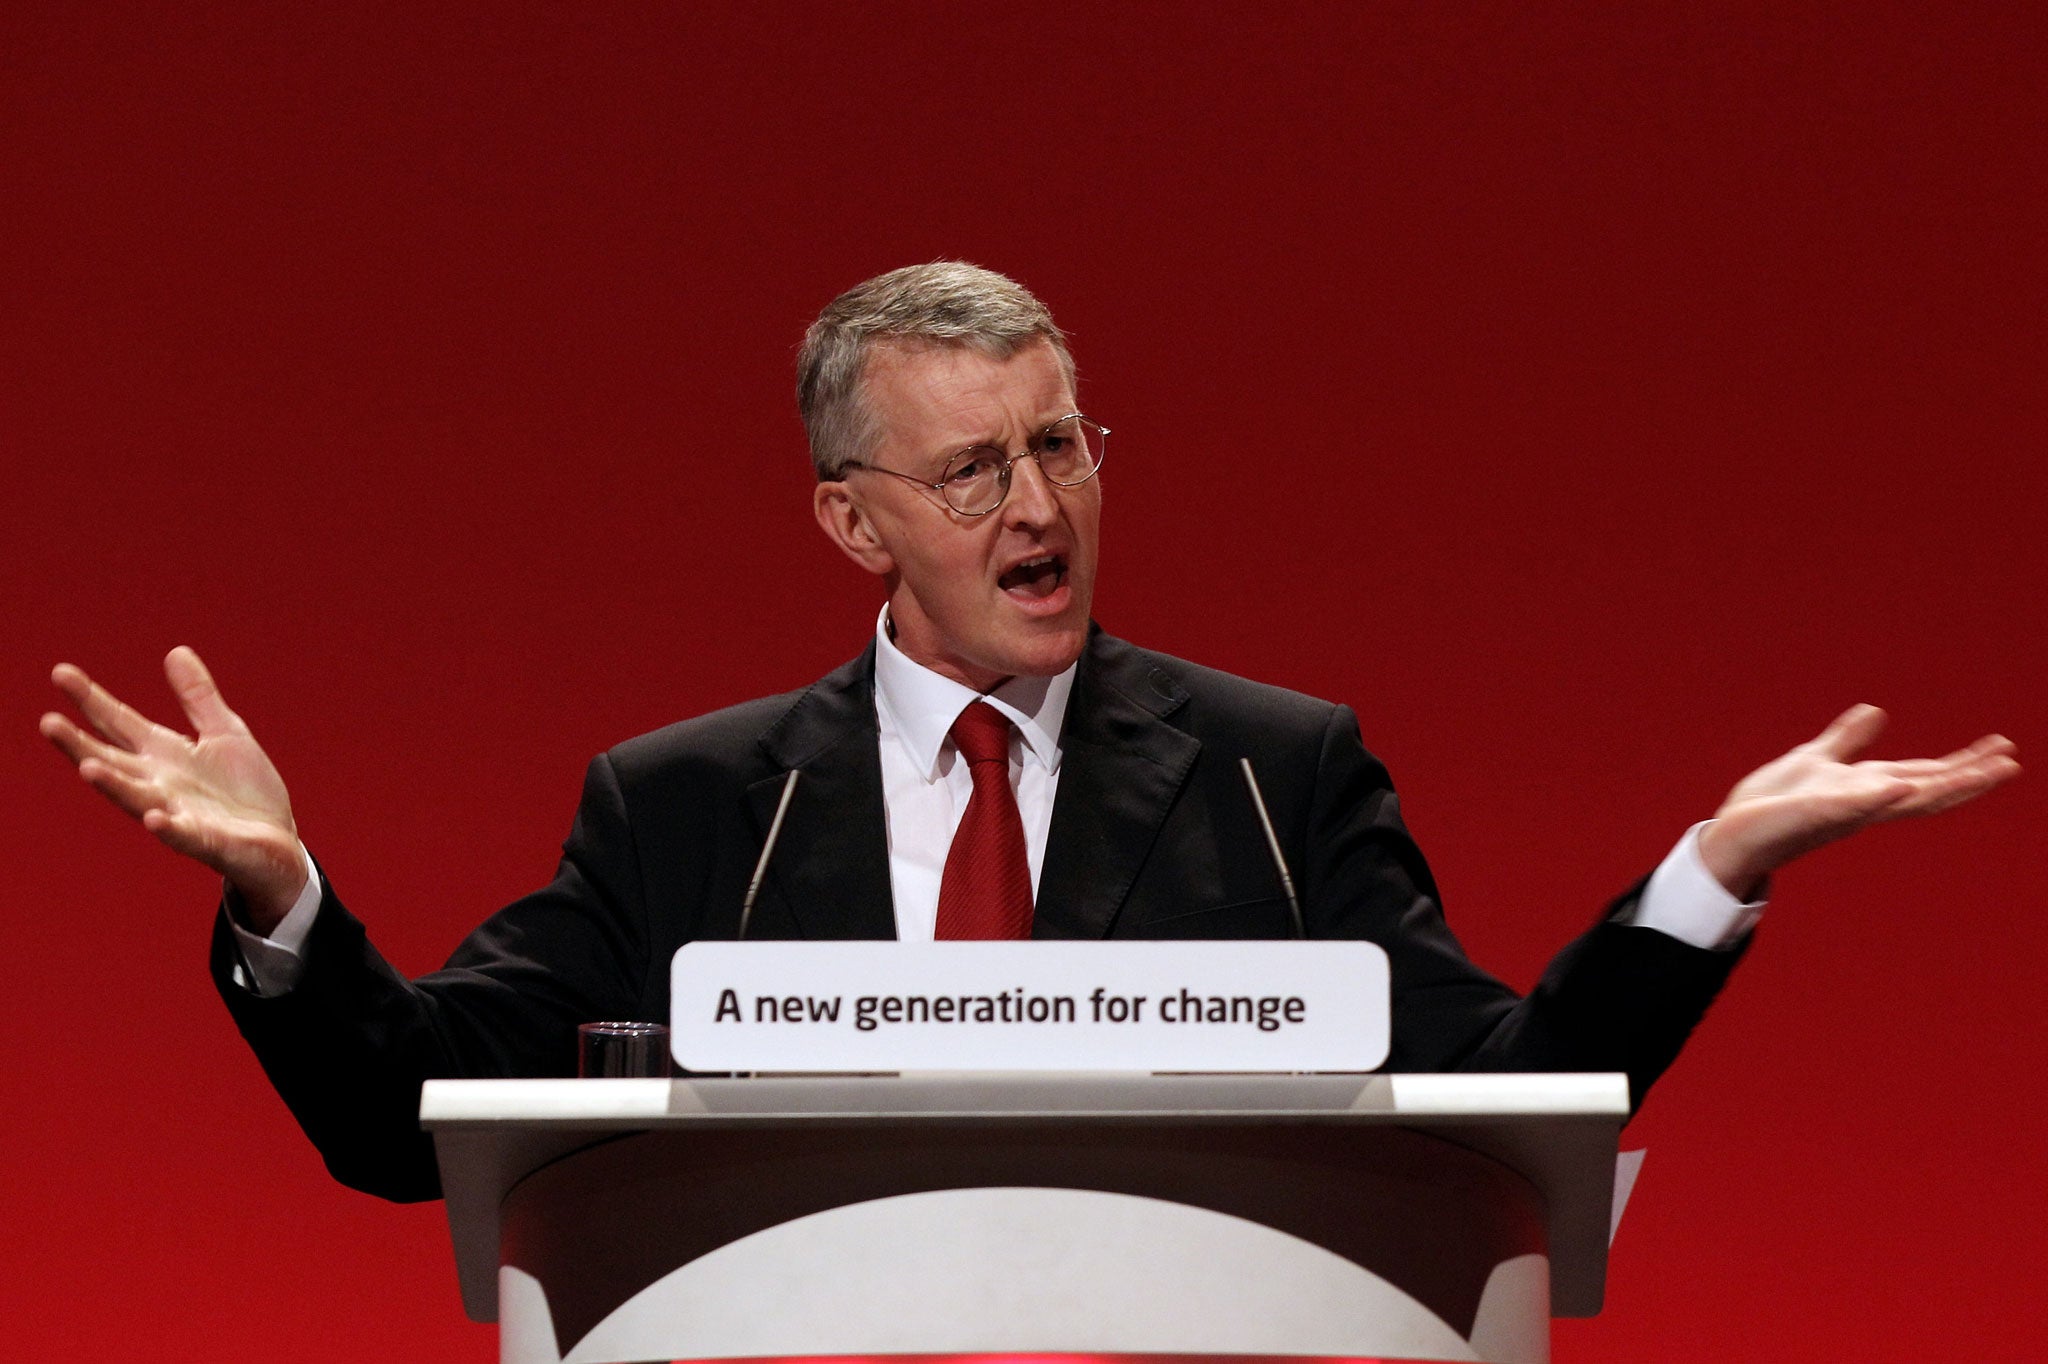 What's in a name: Labour MP Hilary Benn